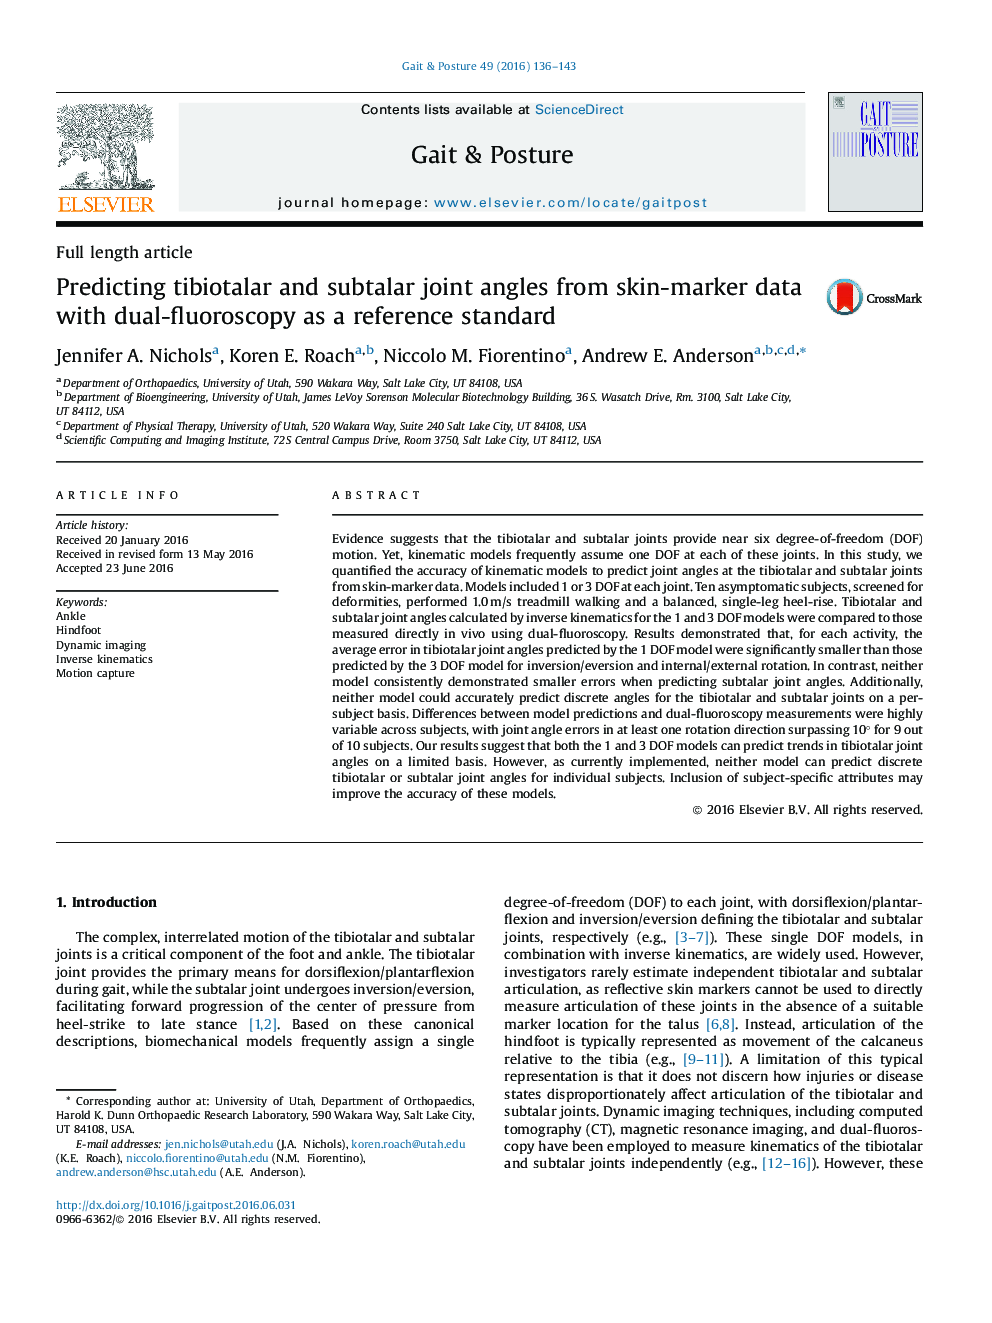 Predicting tibiotalar and subtalar joint angles from skin-marker data with dual-fluoroscopy as a reference standard